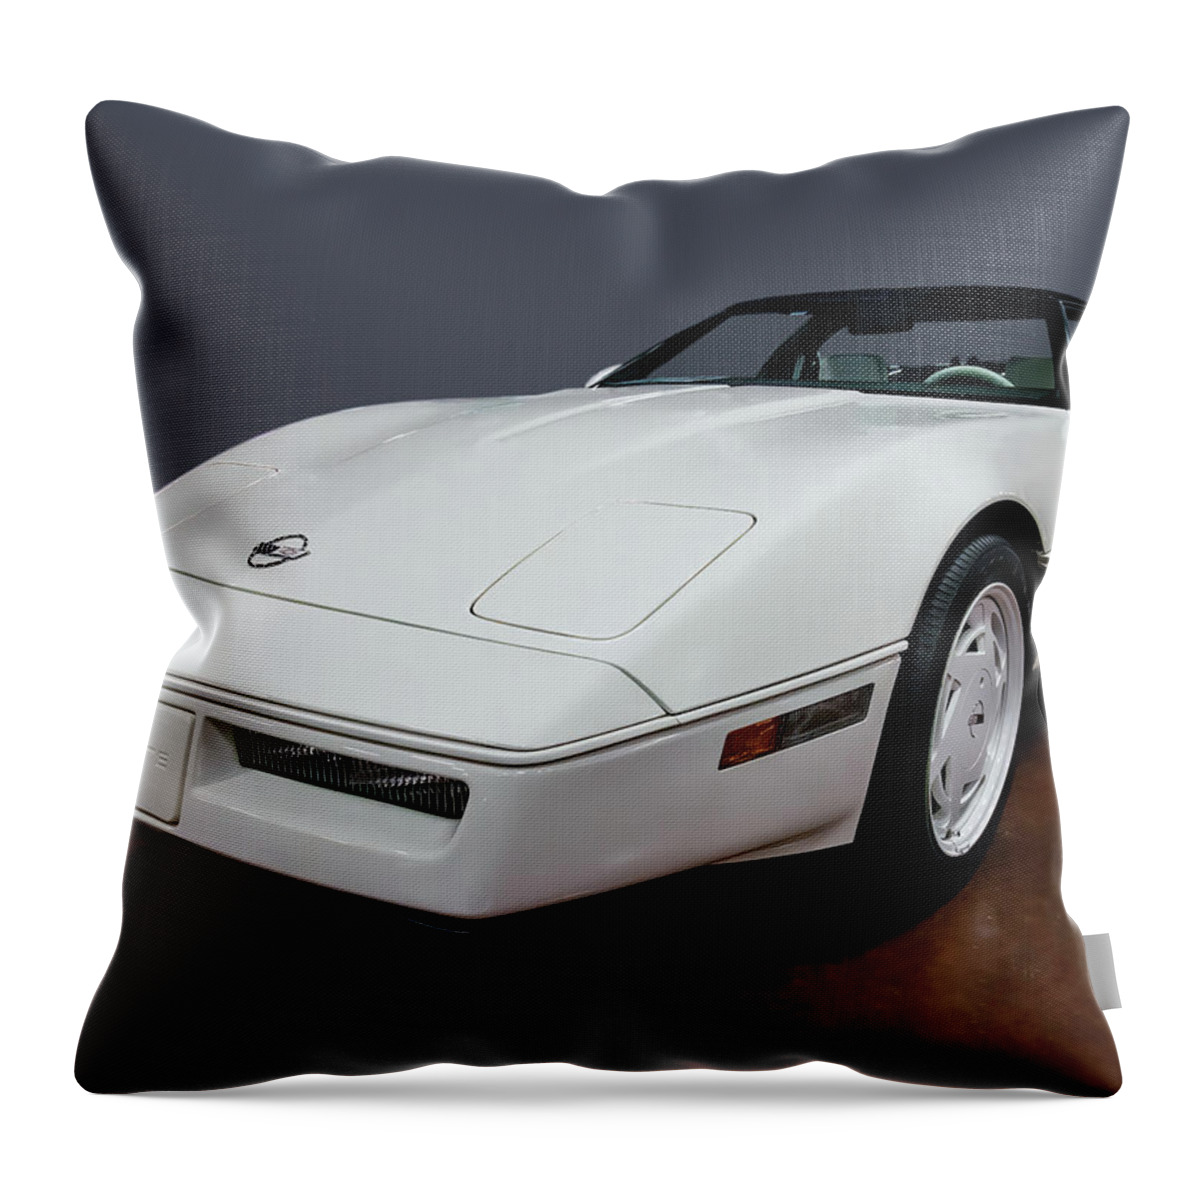 1988 Chevrolet Corvette 35th Anniversary Edition Throw Pillow featuring the photograph 1988 Chevrolet Corvette 35th anniversary edition by Flees Photos